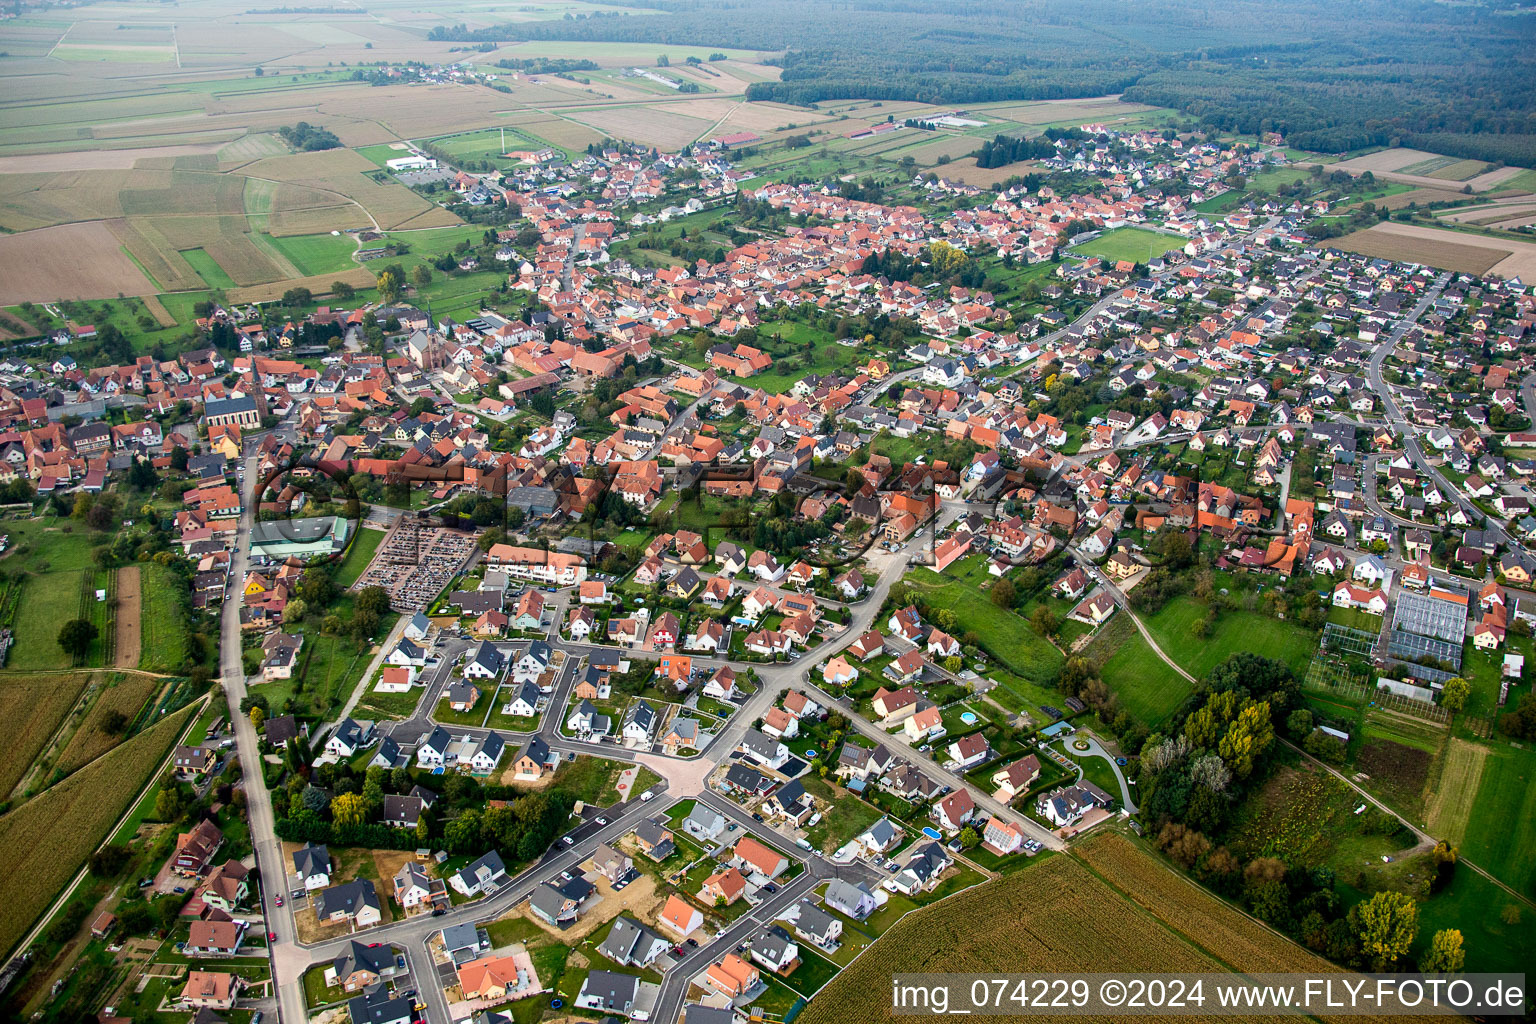 Aerial view of Village view in Weitbruch in Grand Est, France